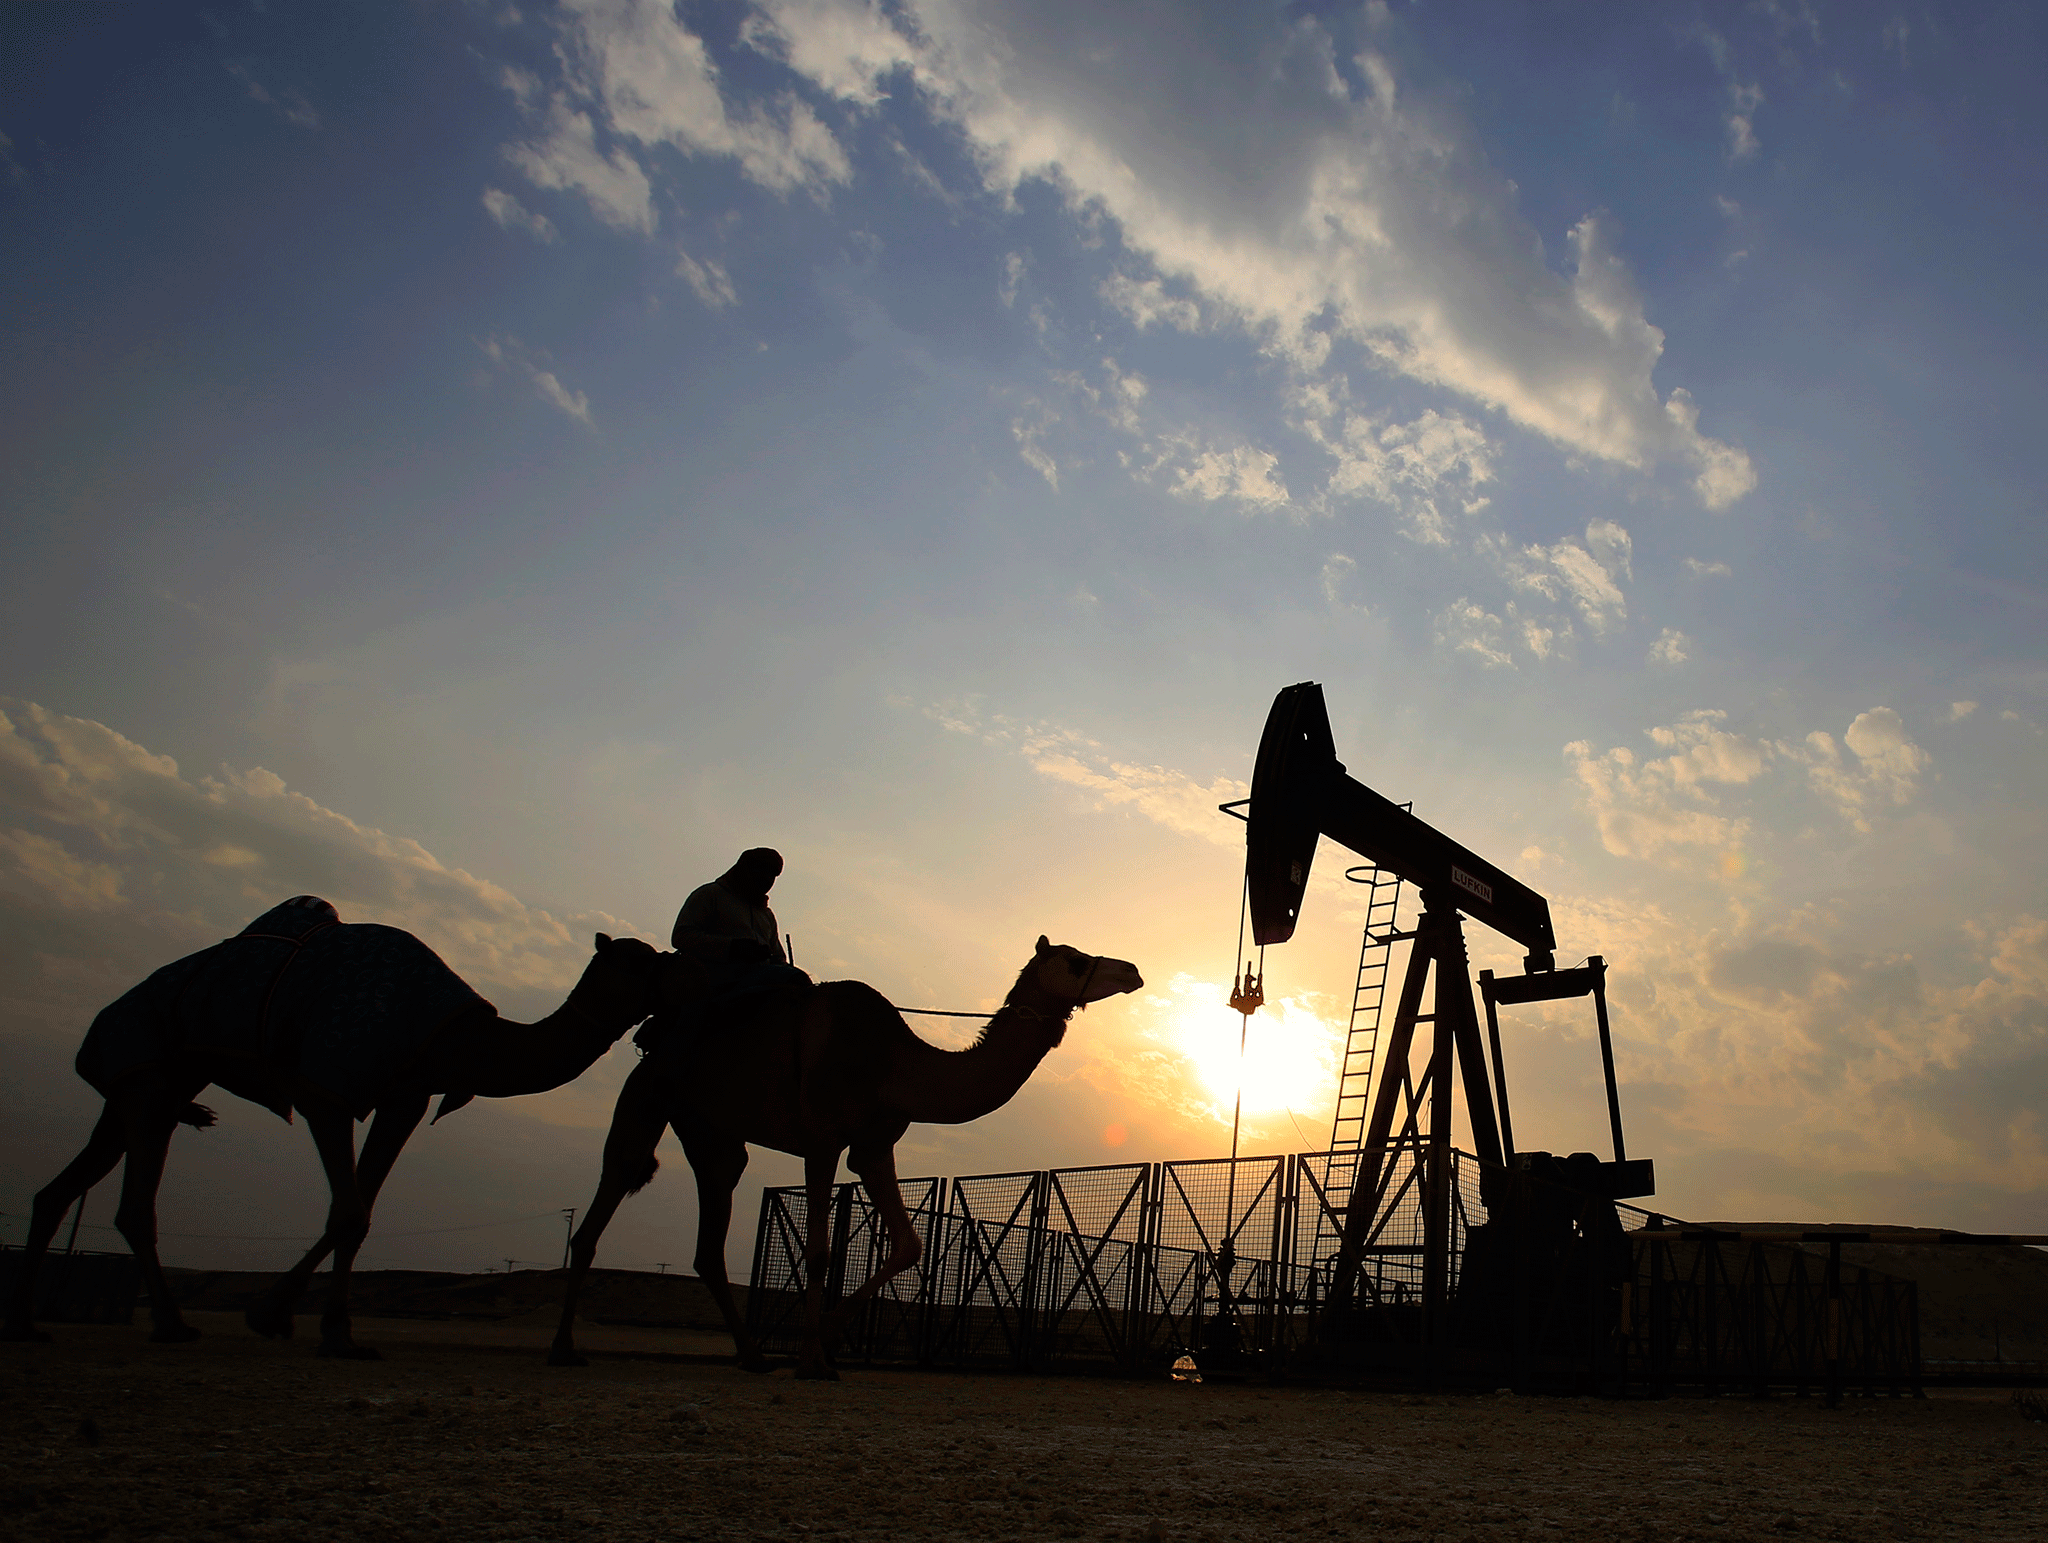 OPEC urged to cut oil output as global production breaks new records